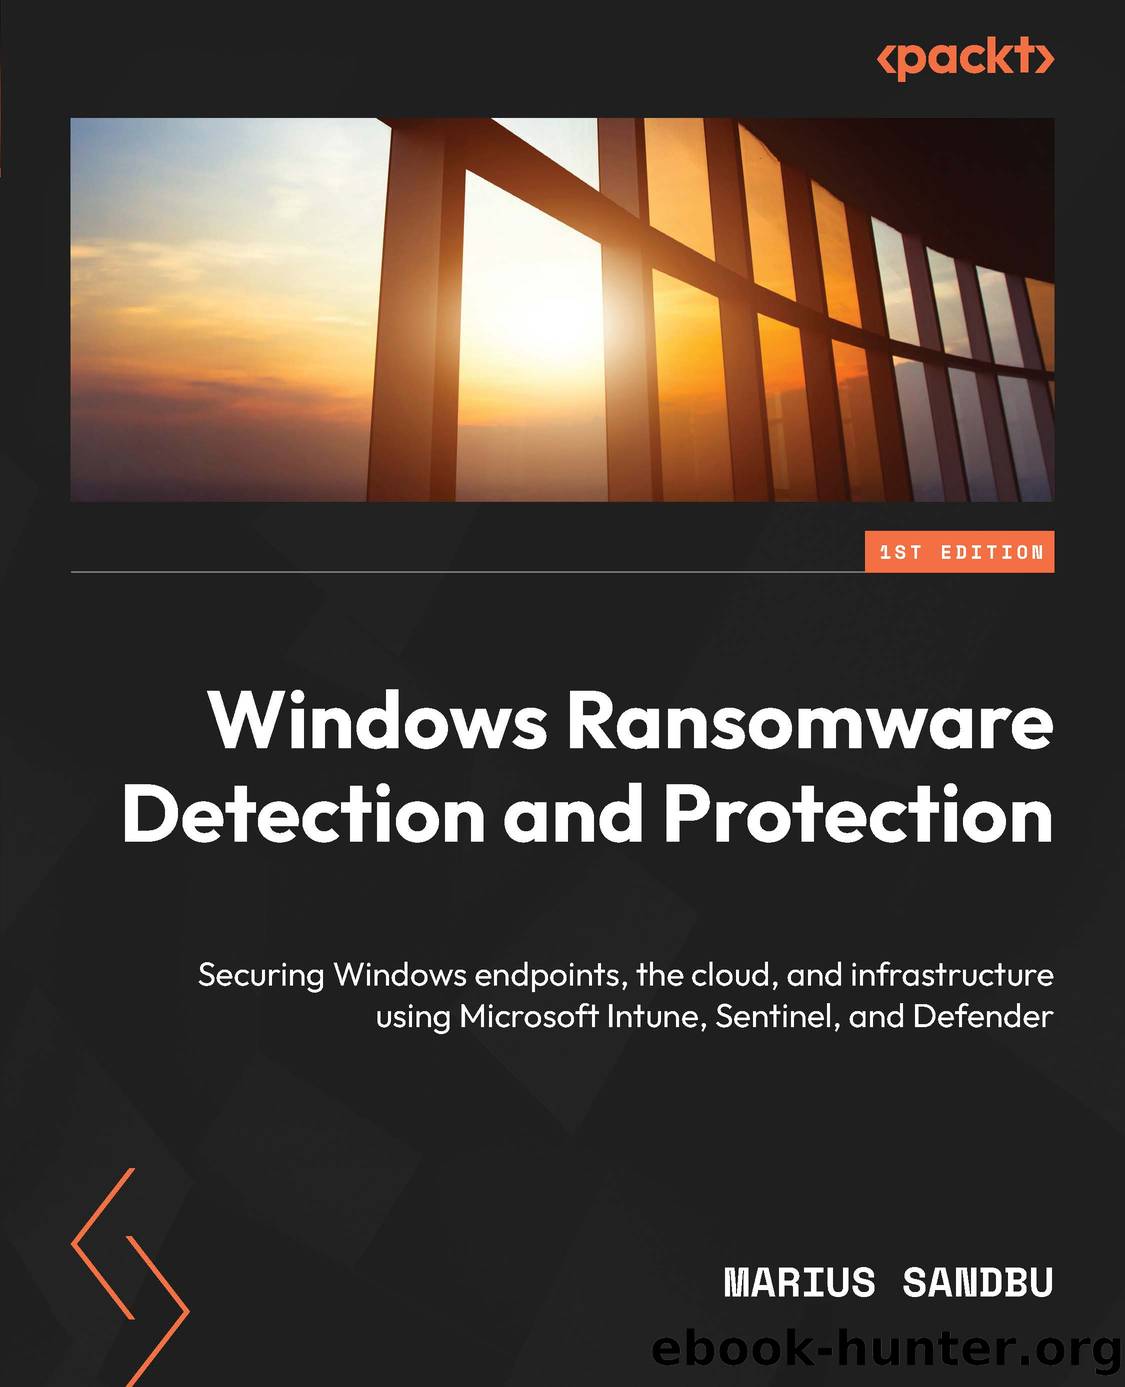 Windows Ransomware Detection and Protection by Marius Sandbu